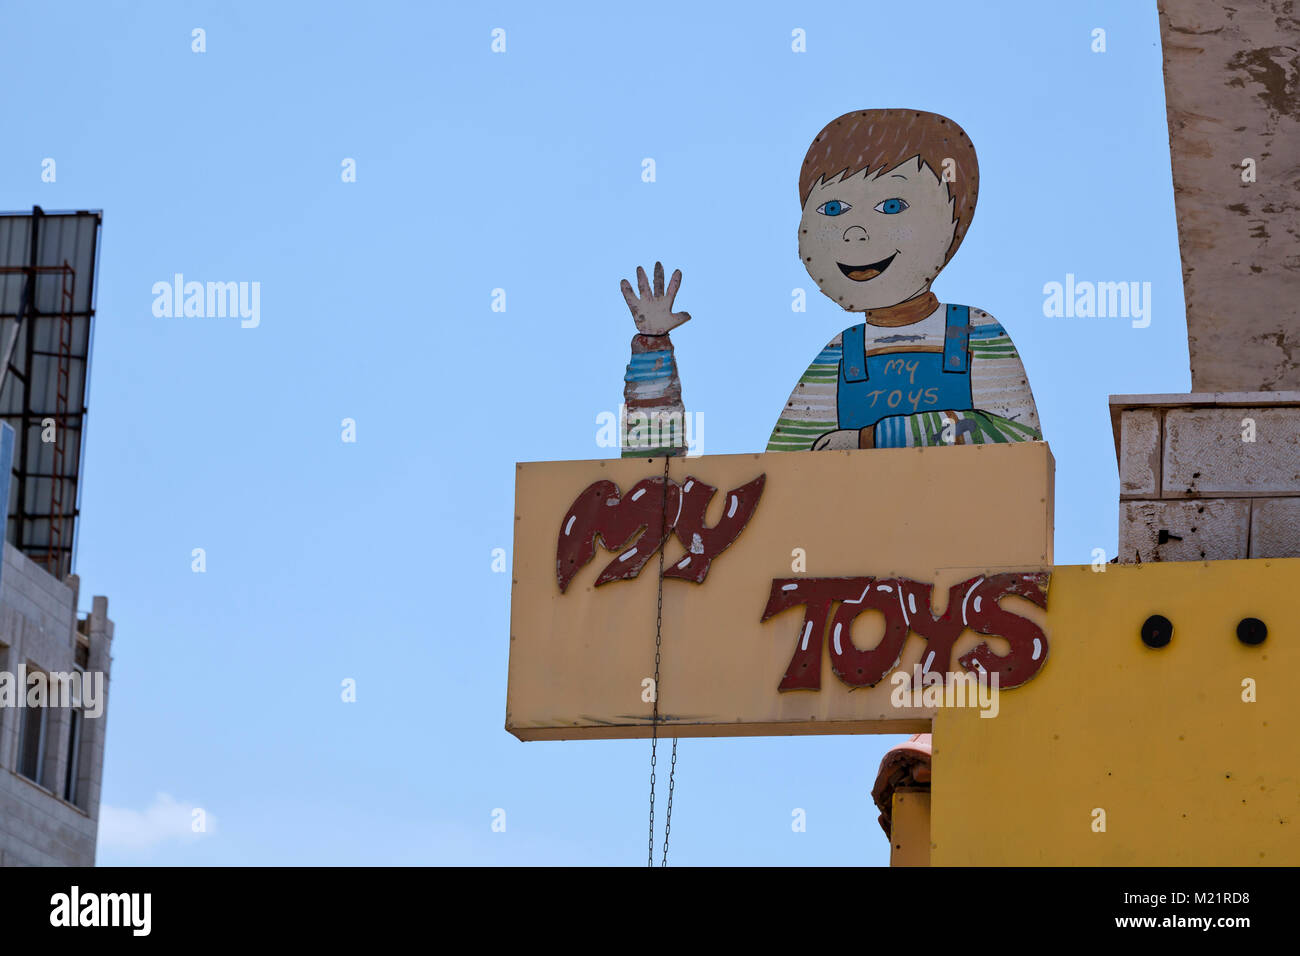 Ramallah, Palestine, July 7, 2014: Hilarious design of a toy shop billboard in Palestine Stock Photo